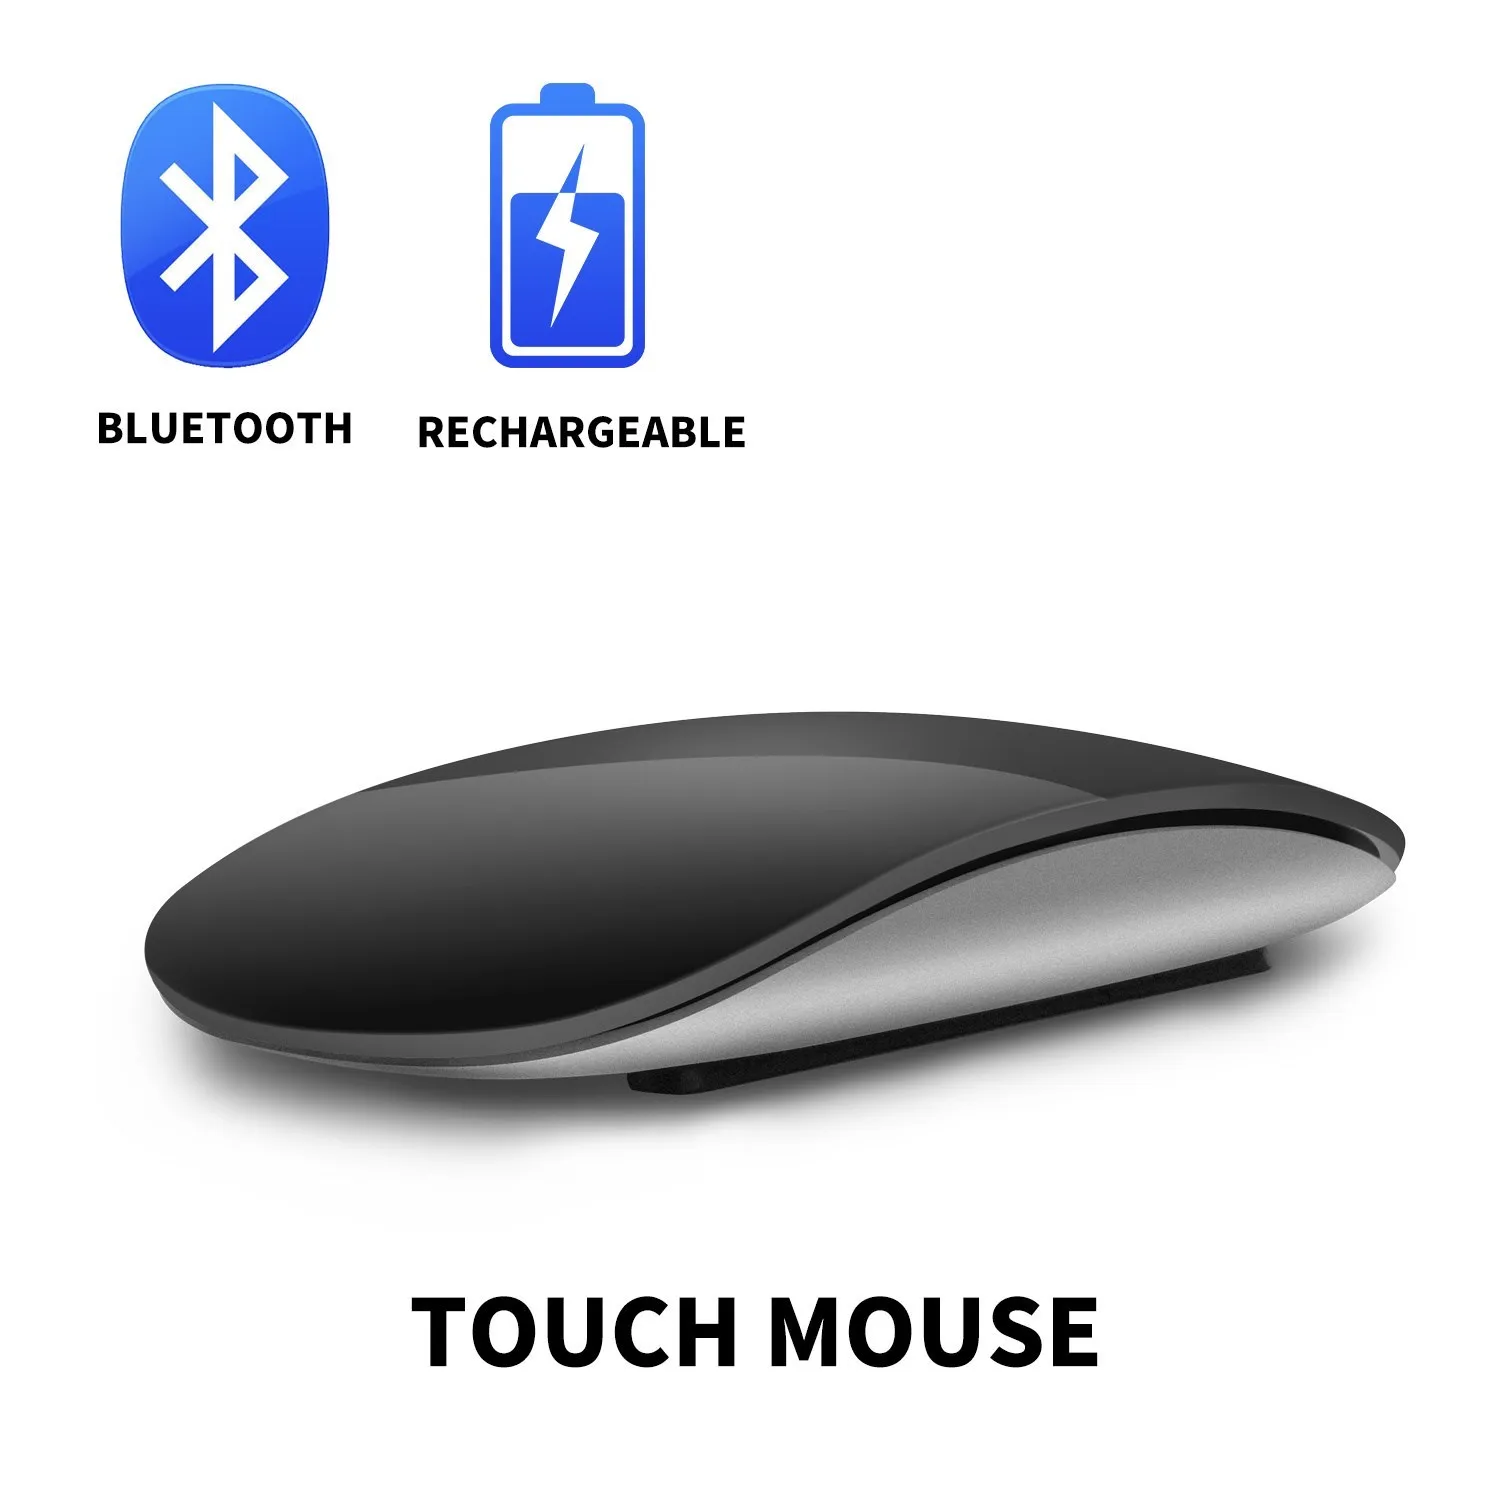 

New Bluetooth USB Wireless Magic Gamer Mouse Noiseless Laser Ergonomic Design Touch For Apple Macbook Air Pro Asus Dell Laptop